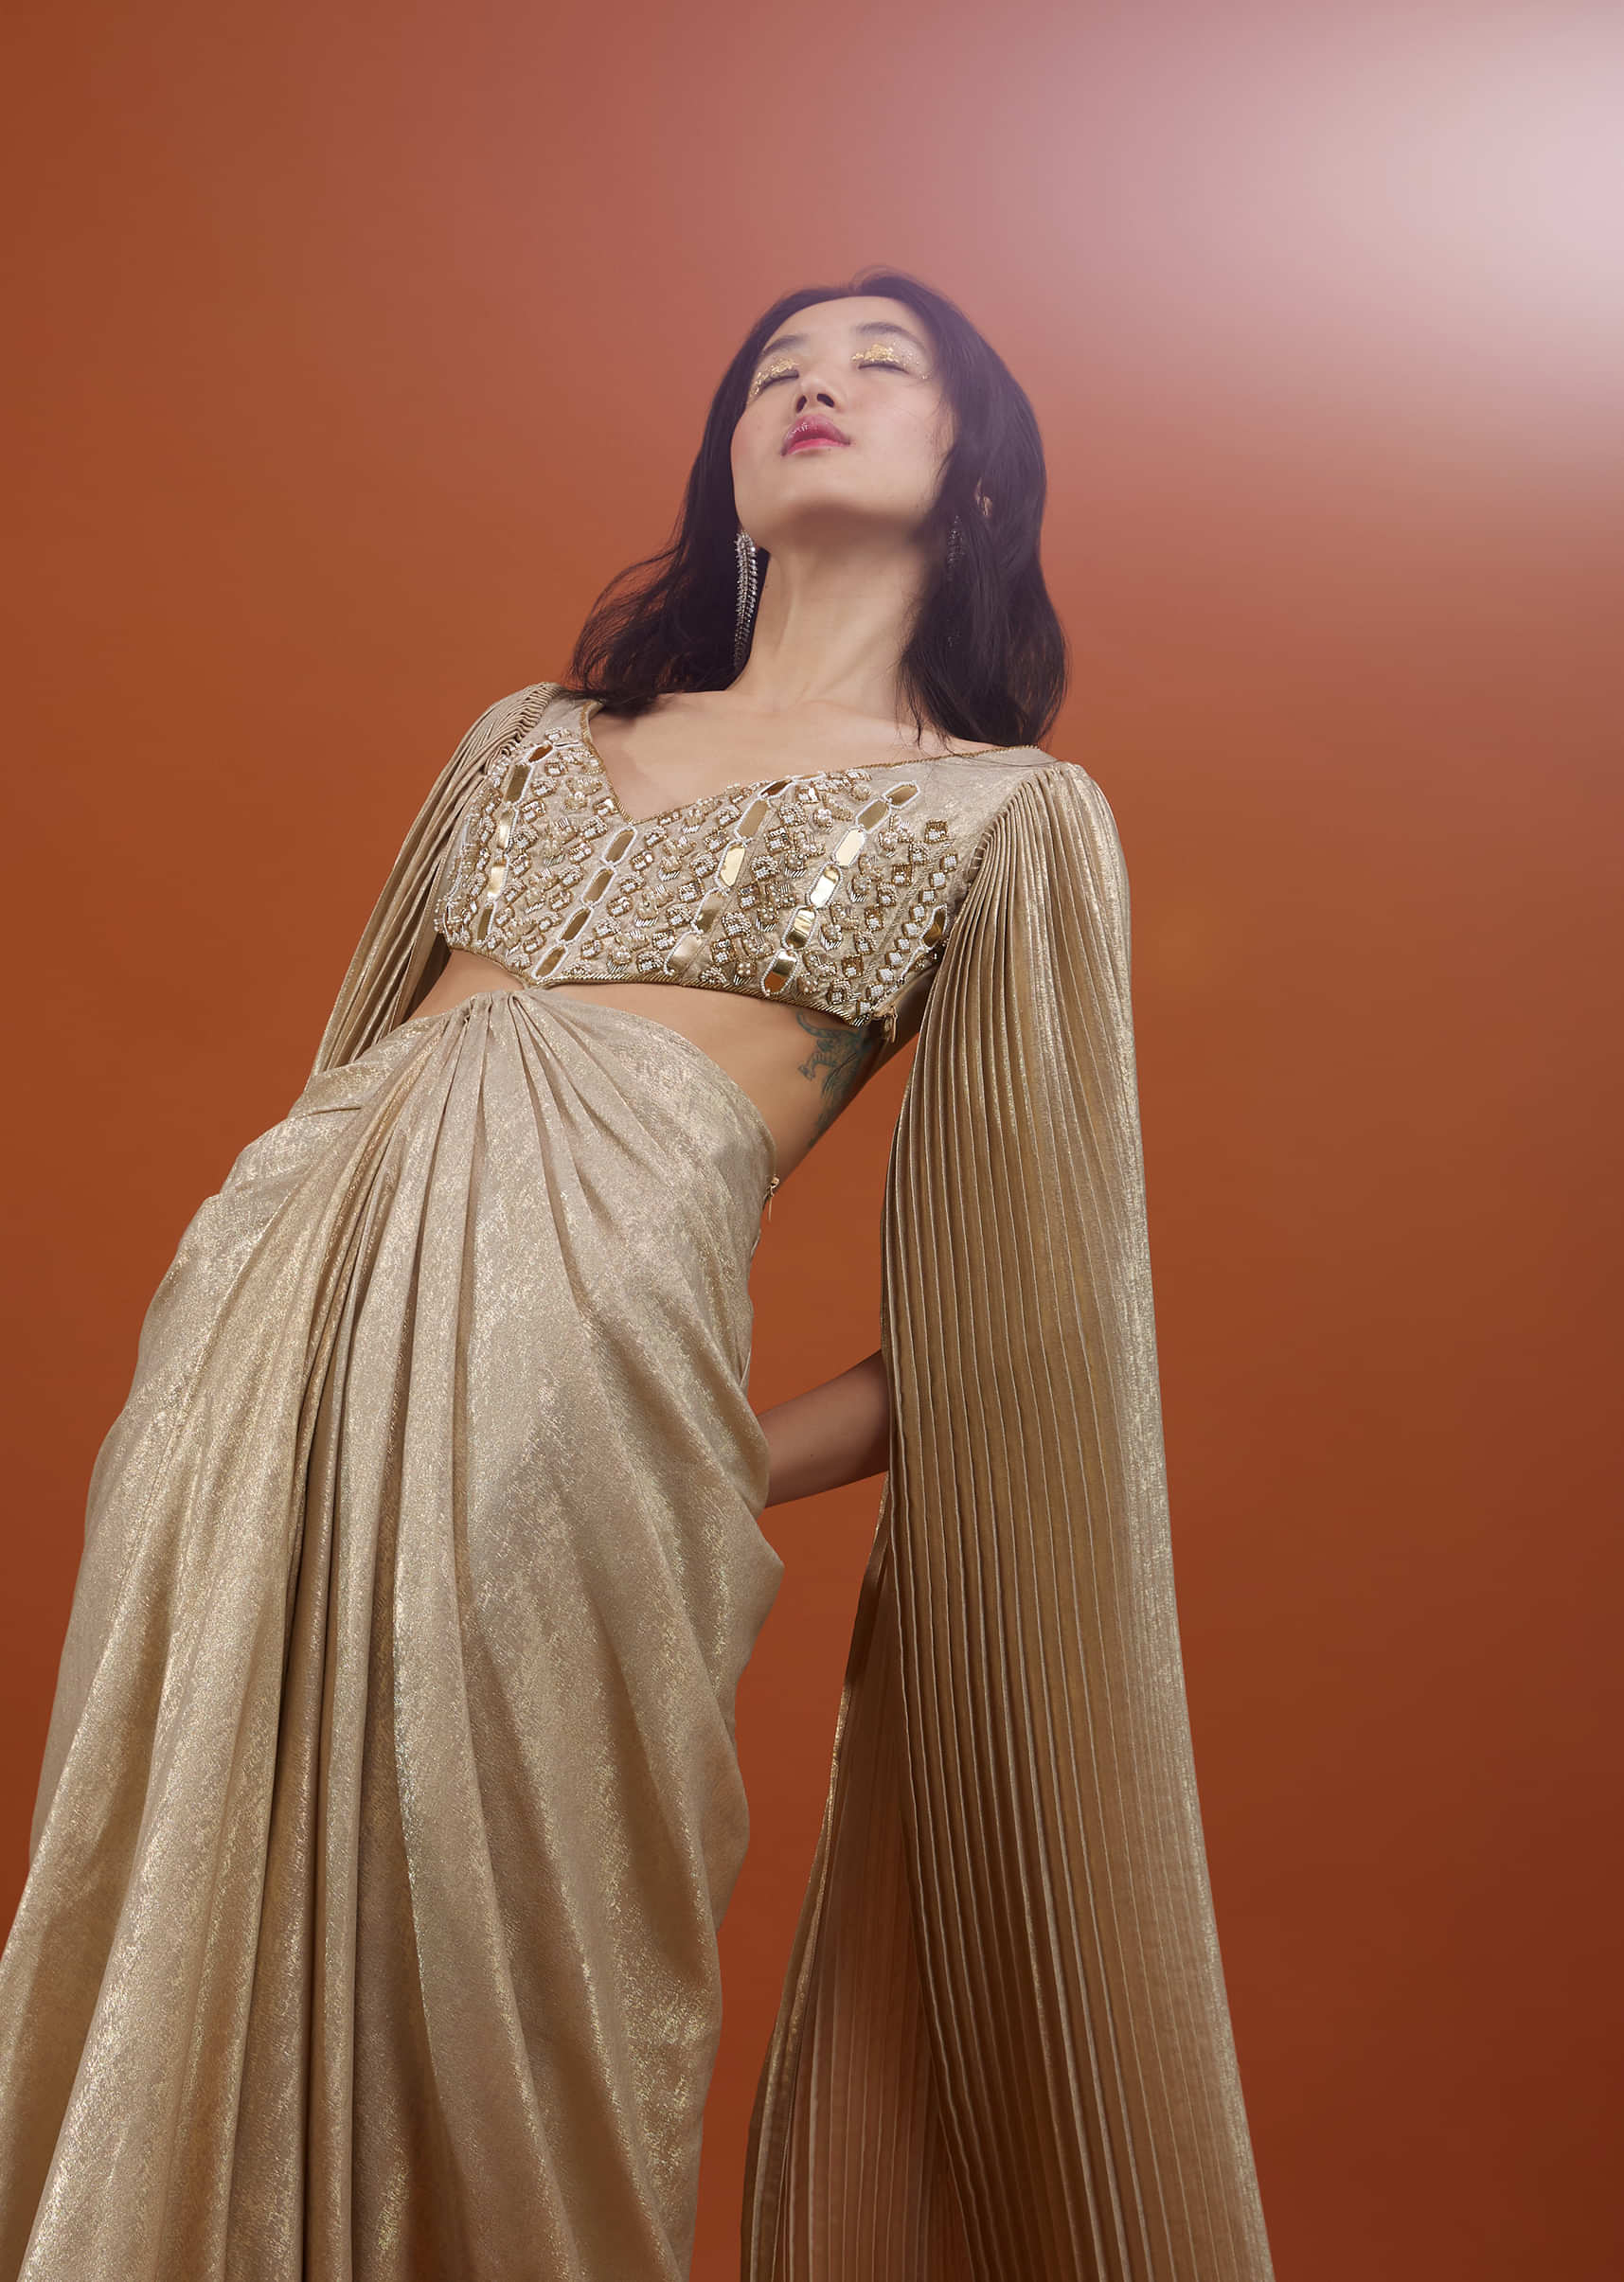 Mocha Brown Gown With A Pre-Pleated Dhoti Skirt Area And Royal Cape Sleeves- NOOR 2022